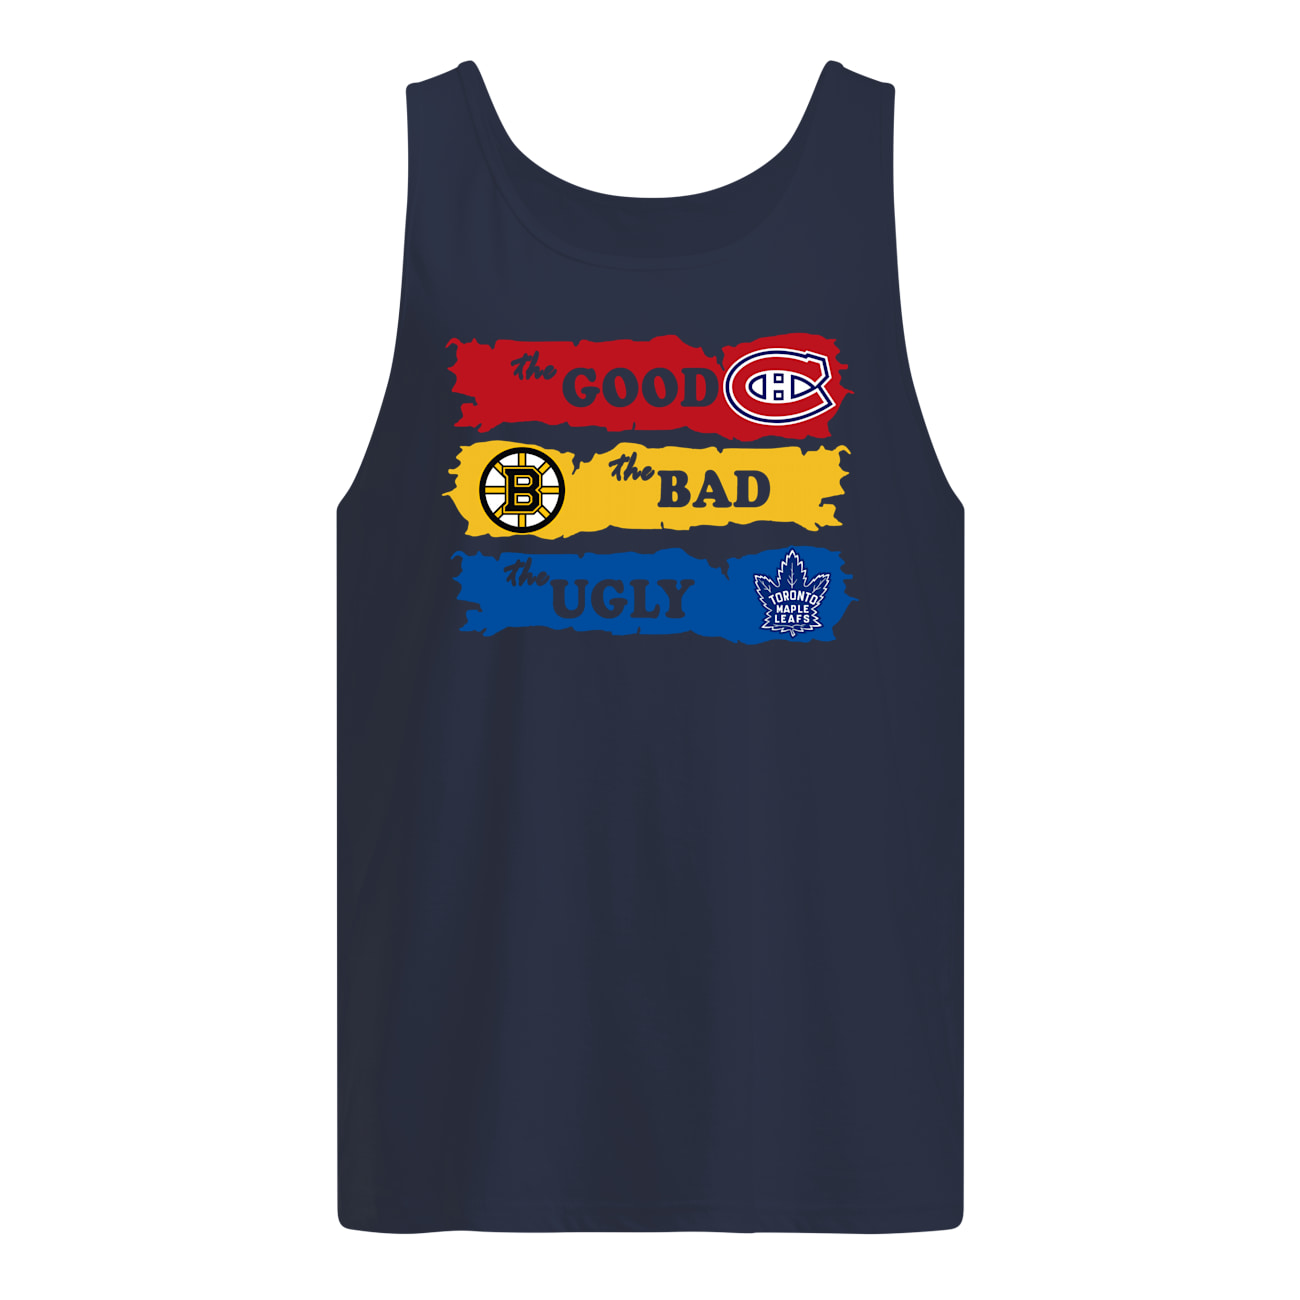 The good montreal canadiens the bad boston bruins the ugly toronto maple leafs tank top